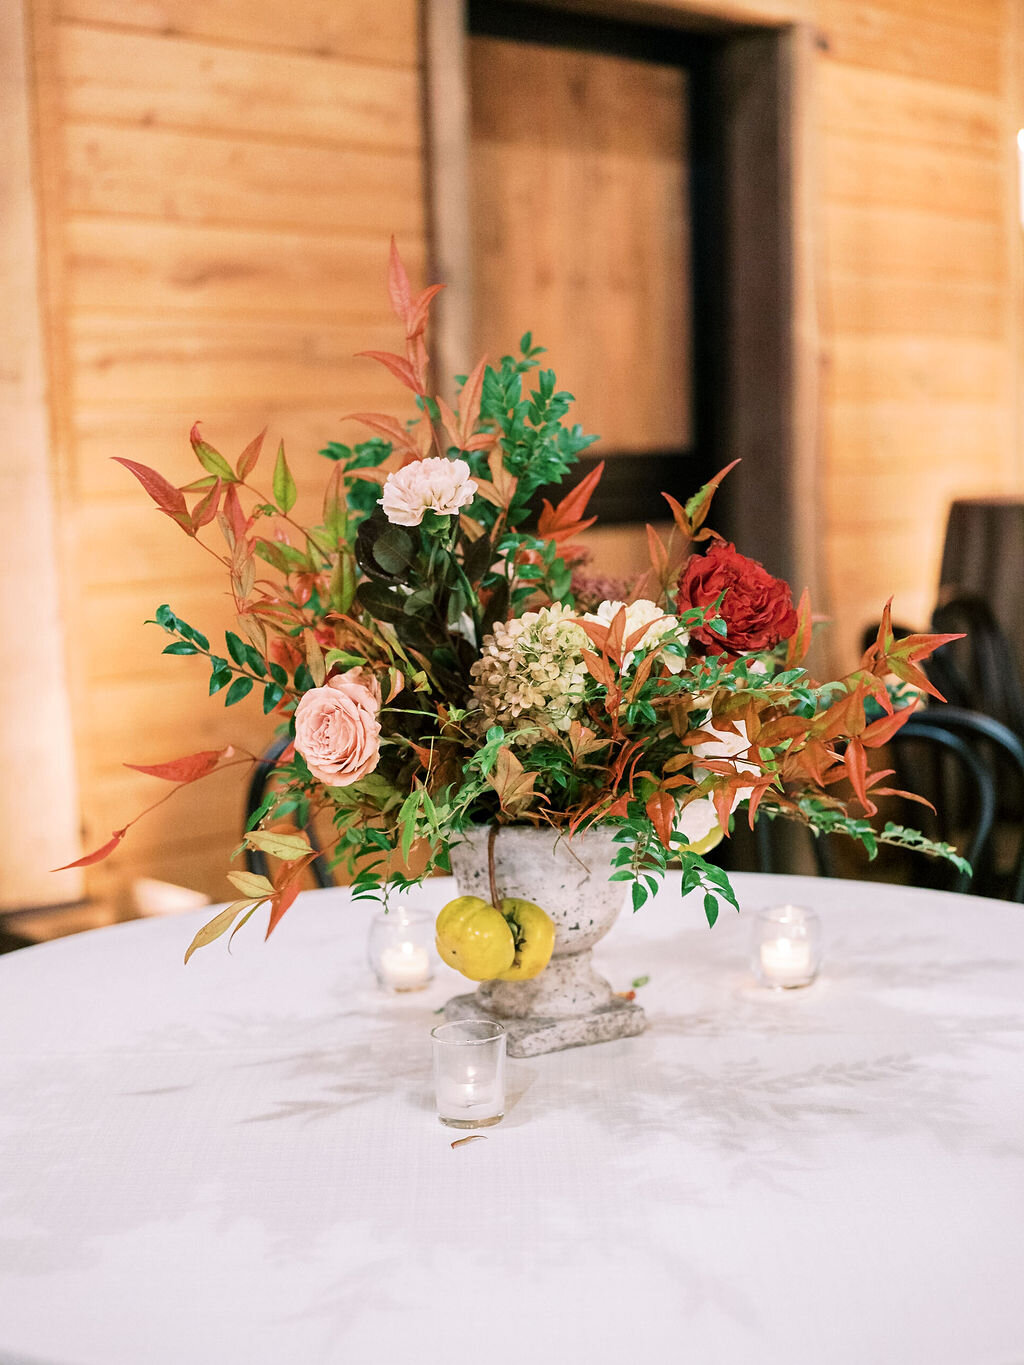 Low European garden urn overflowing with a natural floral arrangement of garden roses, ranunculus, festival bush, fruiting persimmon branches, organic greenery, and fall berries. Centerpiece for a Trinity View Farm wedding by Nashville florist, Rose…